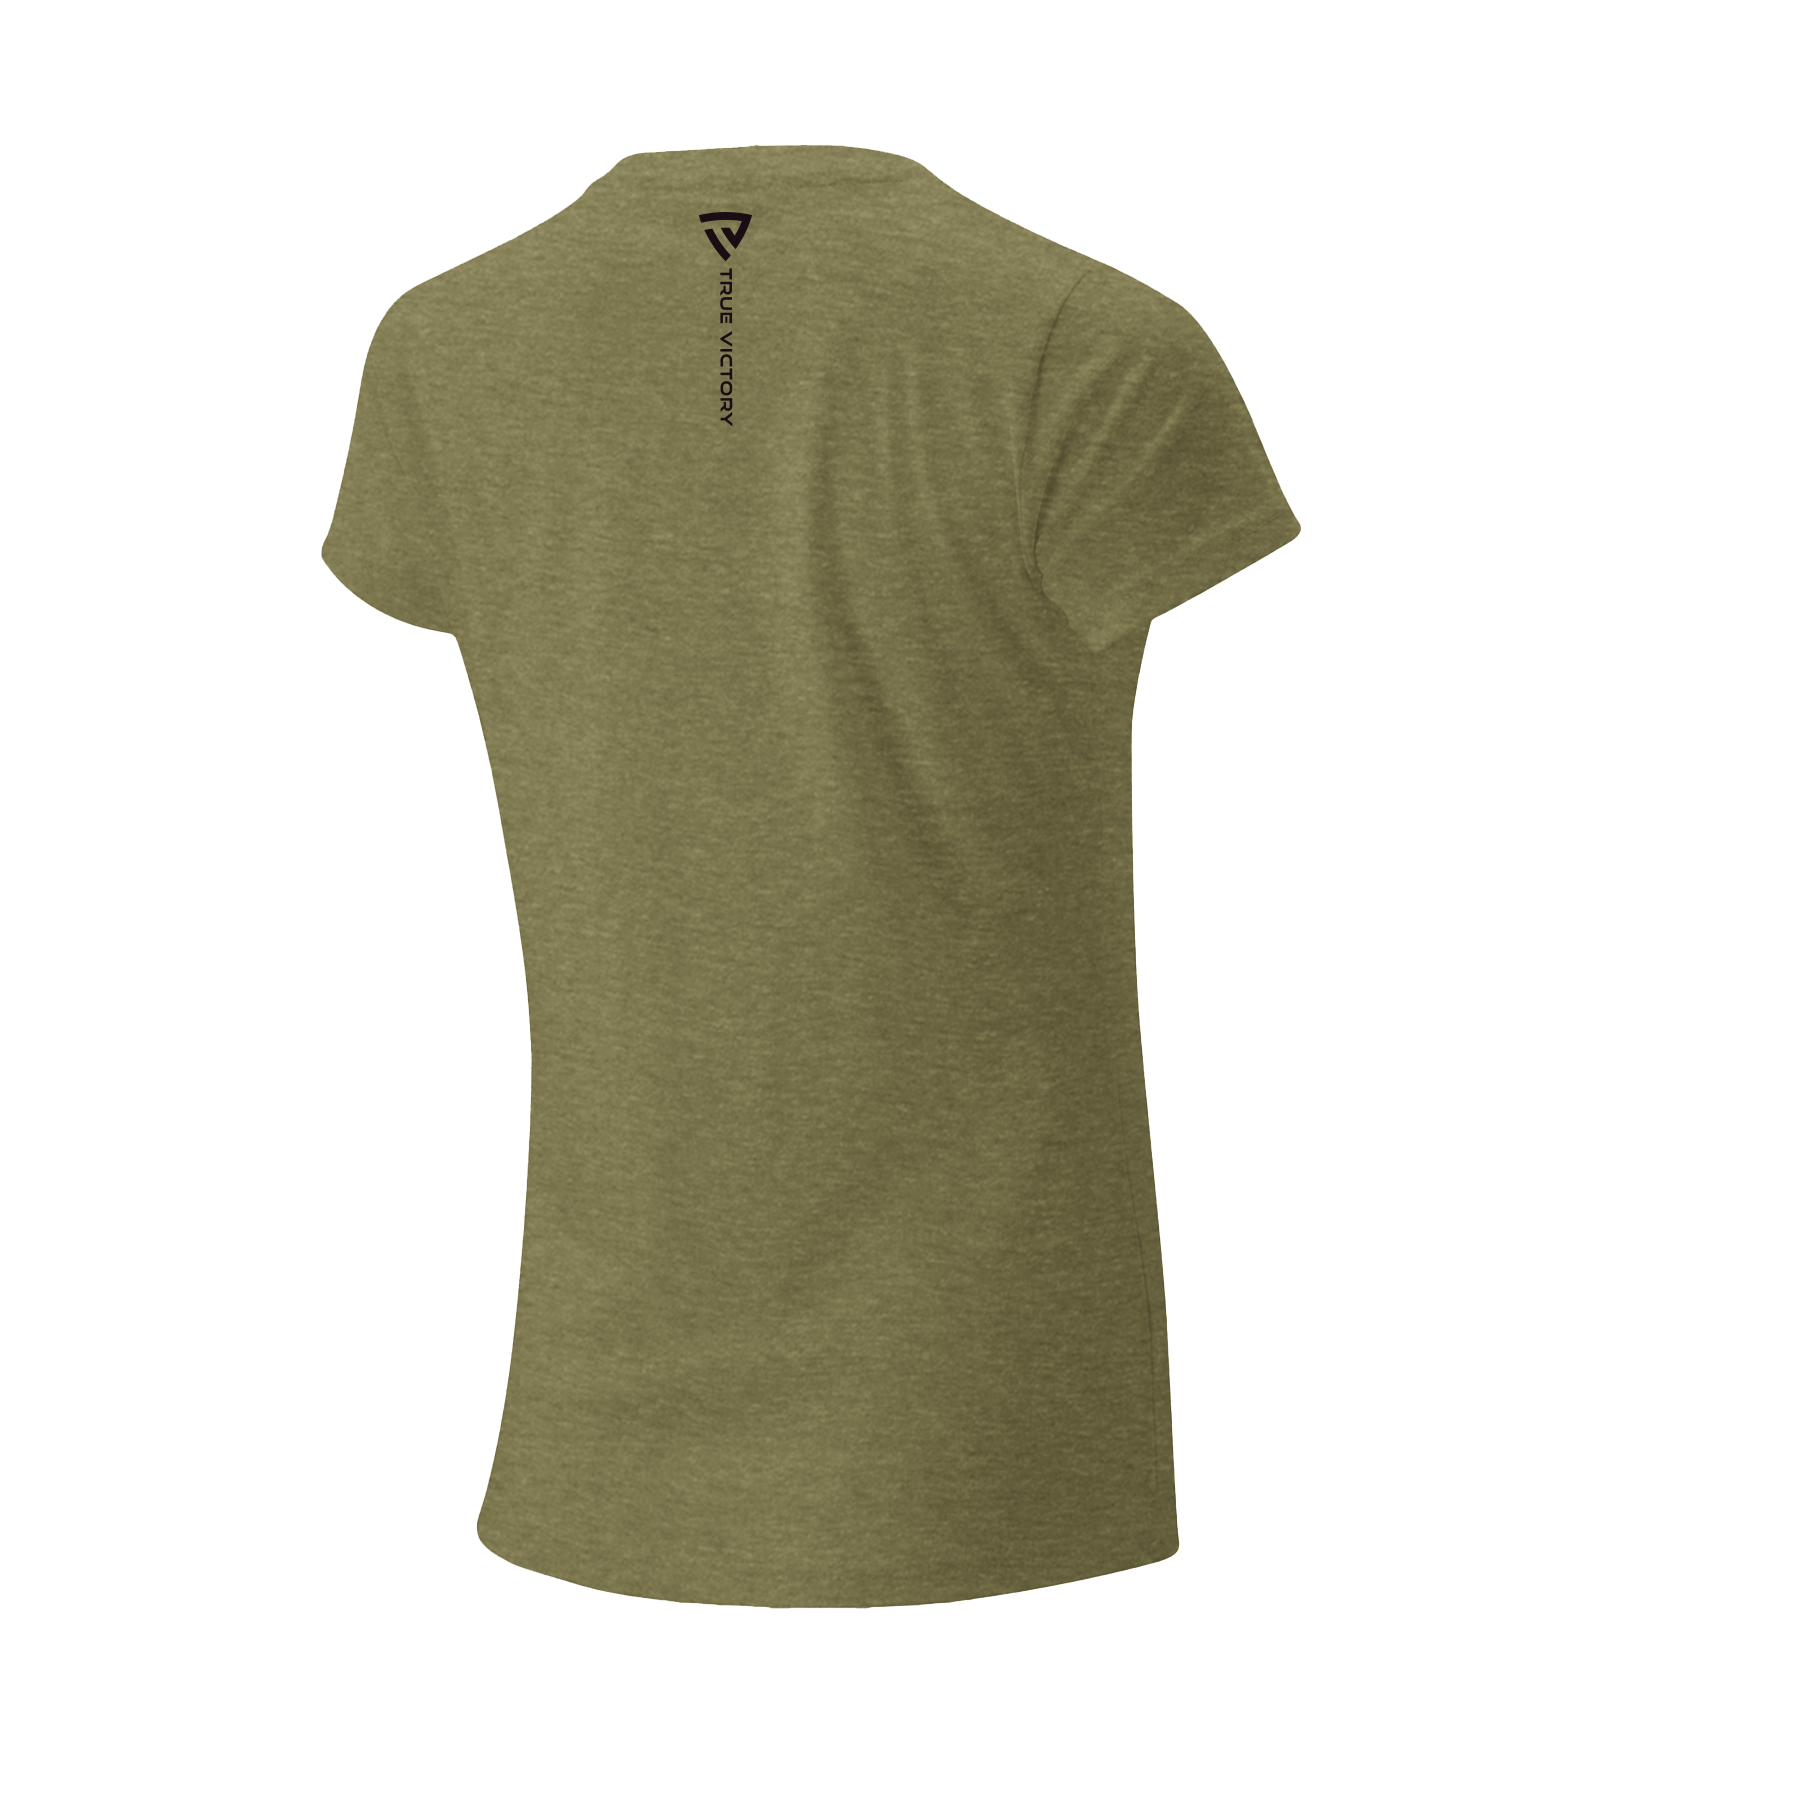 Women's Victorious Military Green x Gator Tee